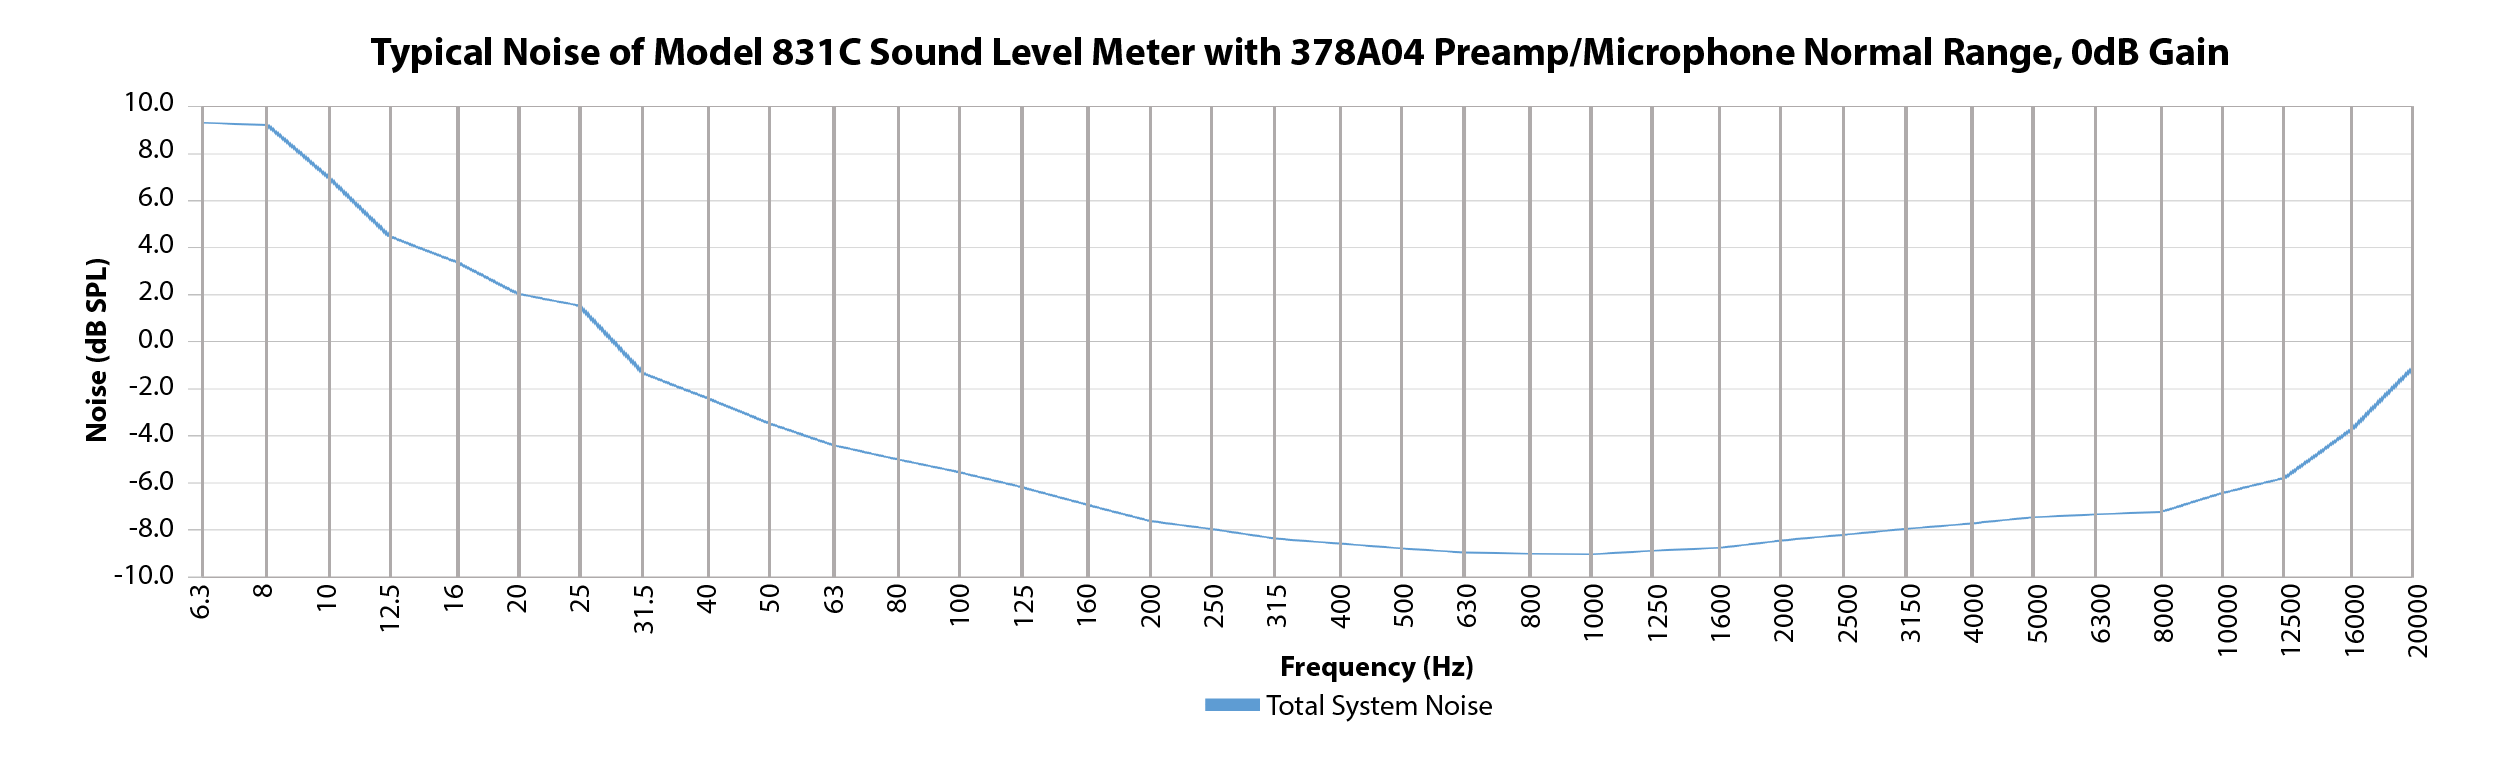 Typical Noise of Model 831C Sound Level Meter with 378A04 Preamp/Microphone Normal Range, 0 dB Gain